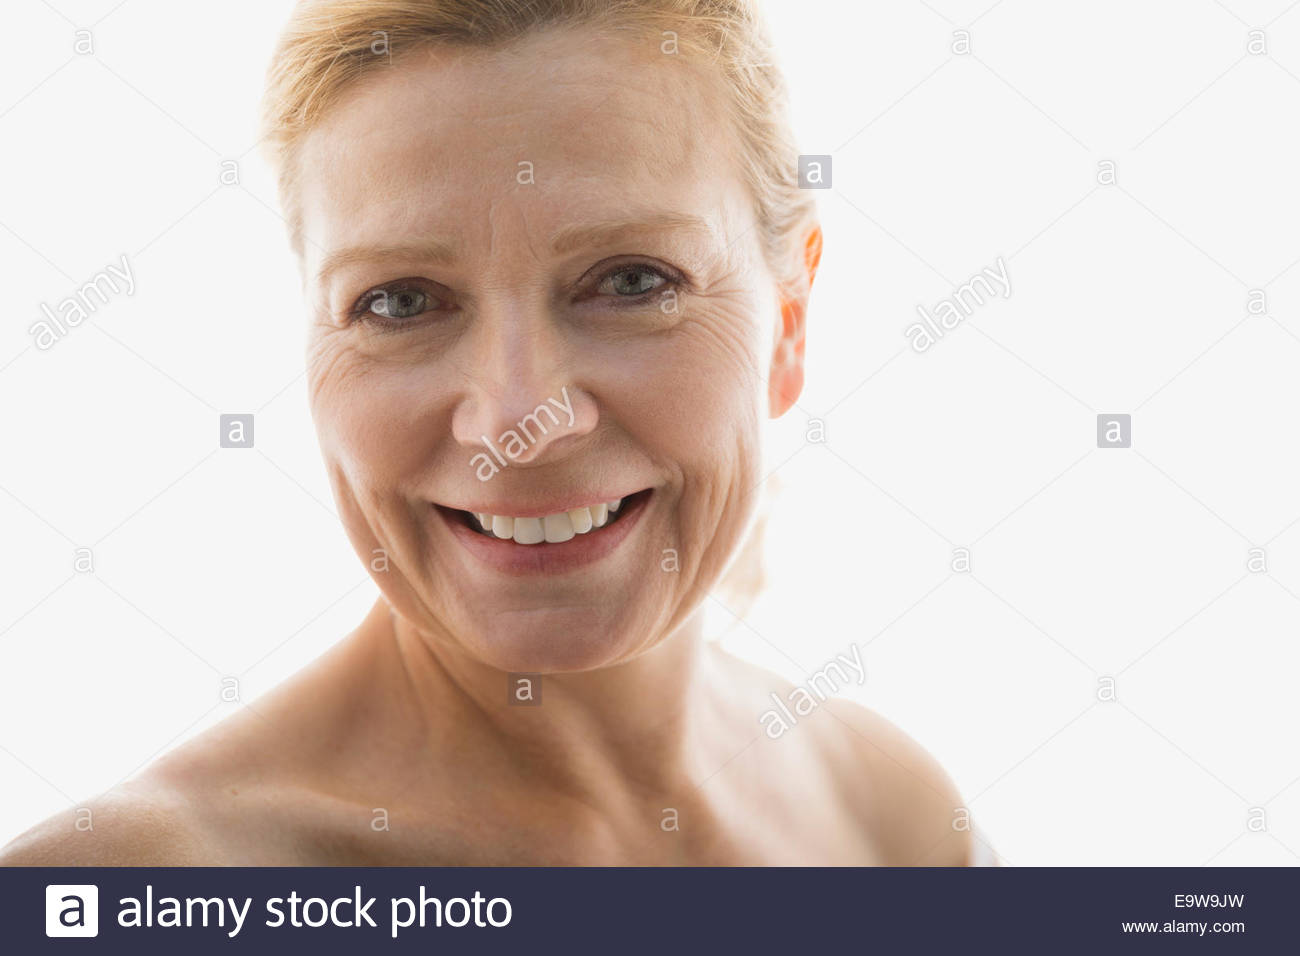 Close up portrait of smiling blonde woman Stock Photo